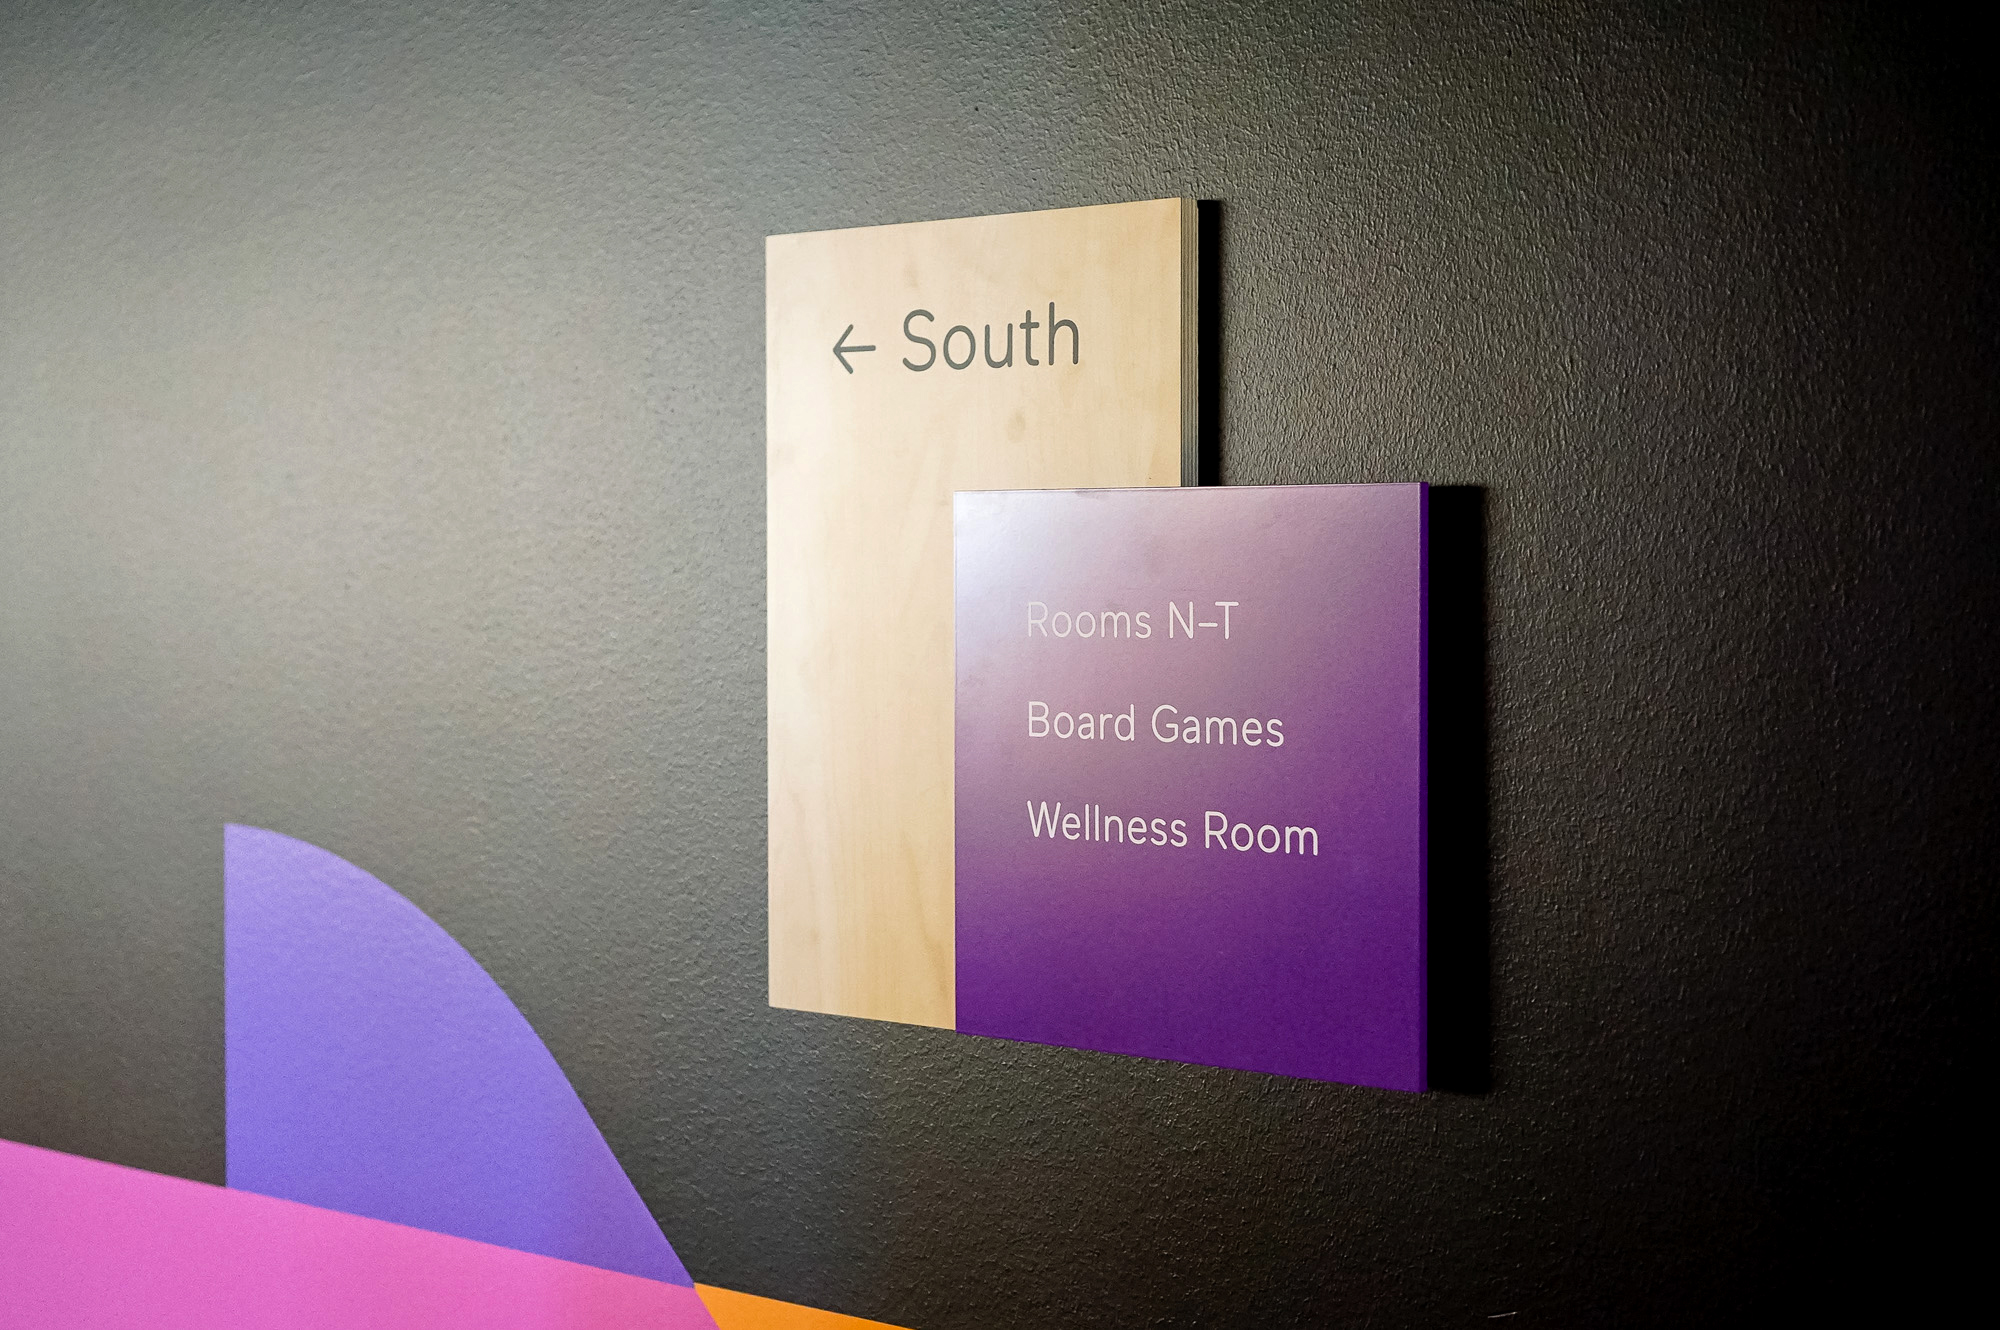 Modern light wood and colored wayfinding wall panels for Scale, a San Francisco based company delivering high quality training data for AI applications such as self-driving cars, mapping, AR/VR, robotics, and more.